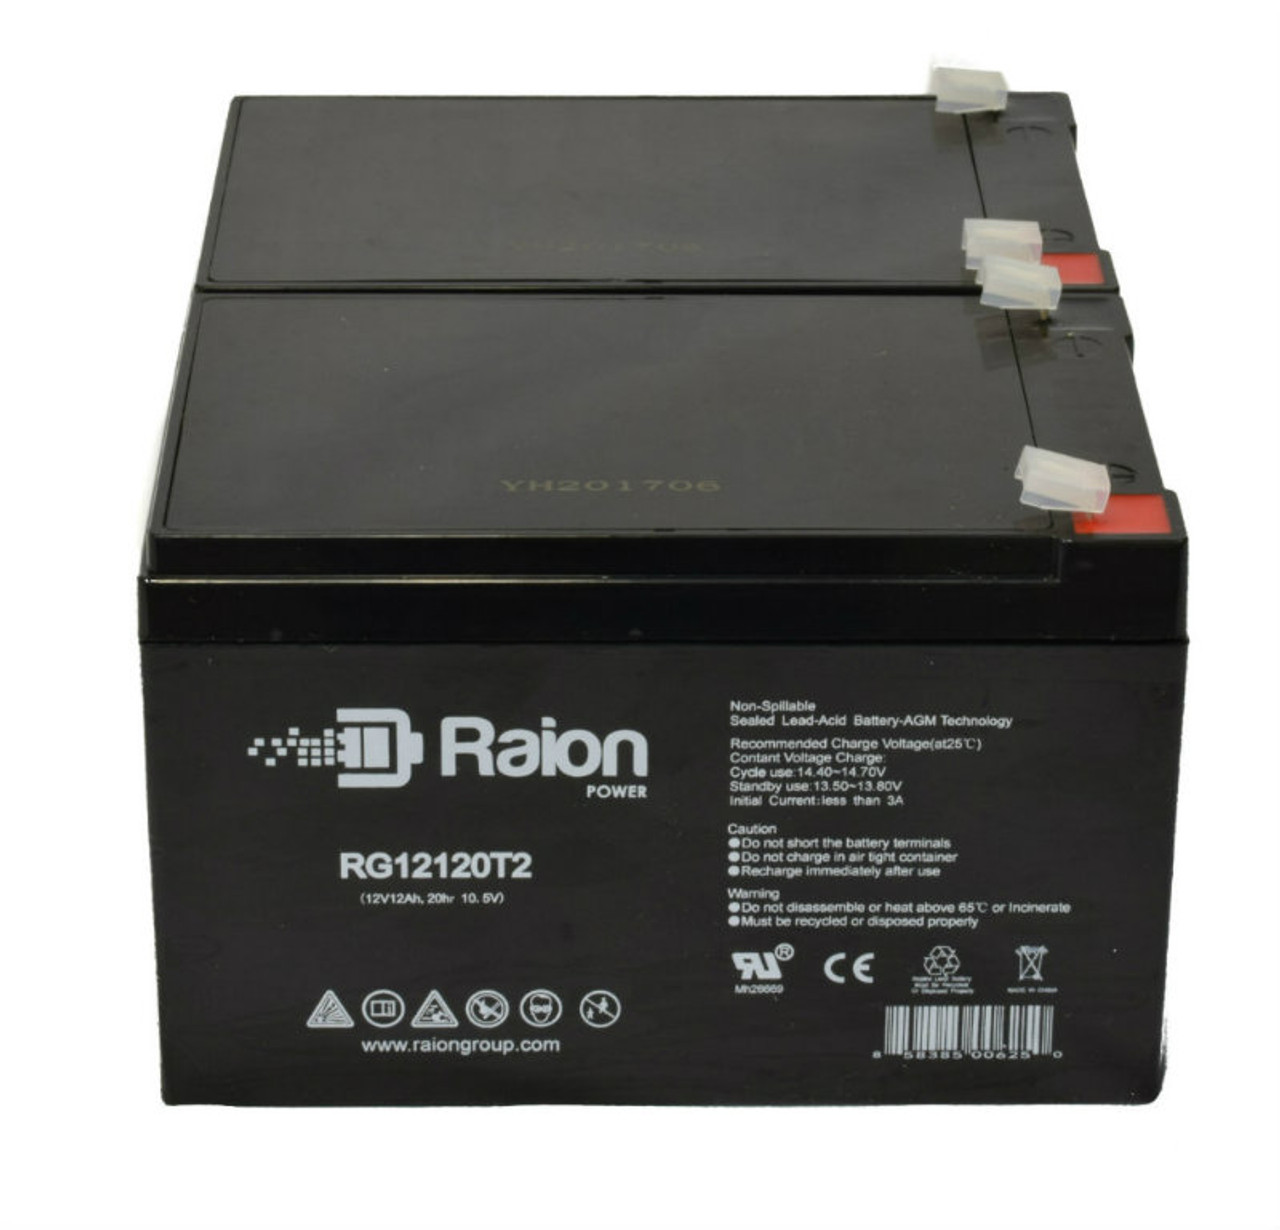 Raion Power 12V 12Ah Non-Spillable Compatible Replacement Battery for NEATA NT12-10 - (2 Pack)